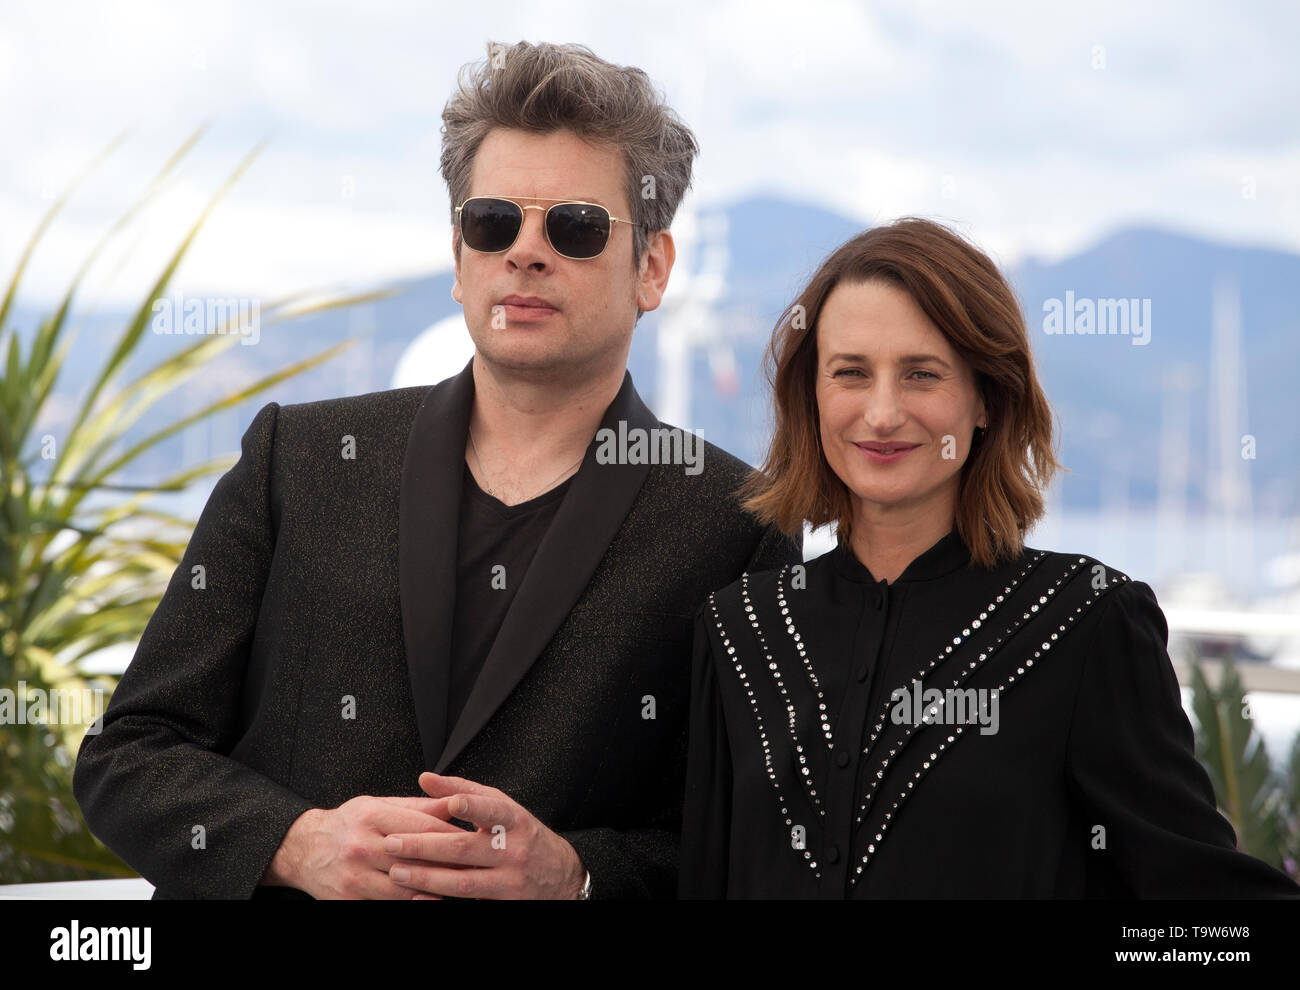 Cannes, France. 20th May, 2019. Benjamin Biolay and Camille Cottin at Room 212 (Chambre 212) film photo call at the 72nd Cannes Film Festival, Monday 20th May 2019, Cannes, France. Photo Credit: Doreen Kennedy/Alamy Live News Stock Photo